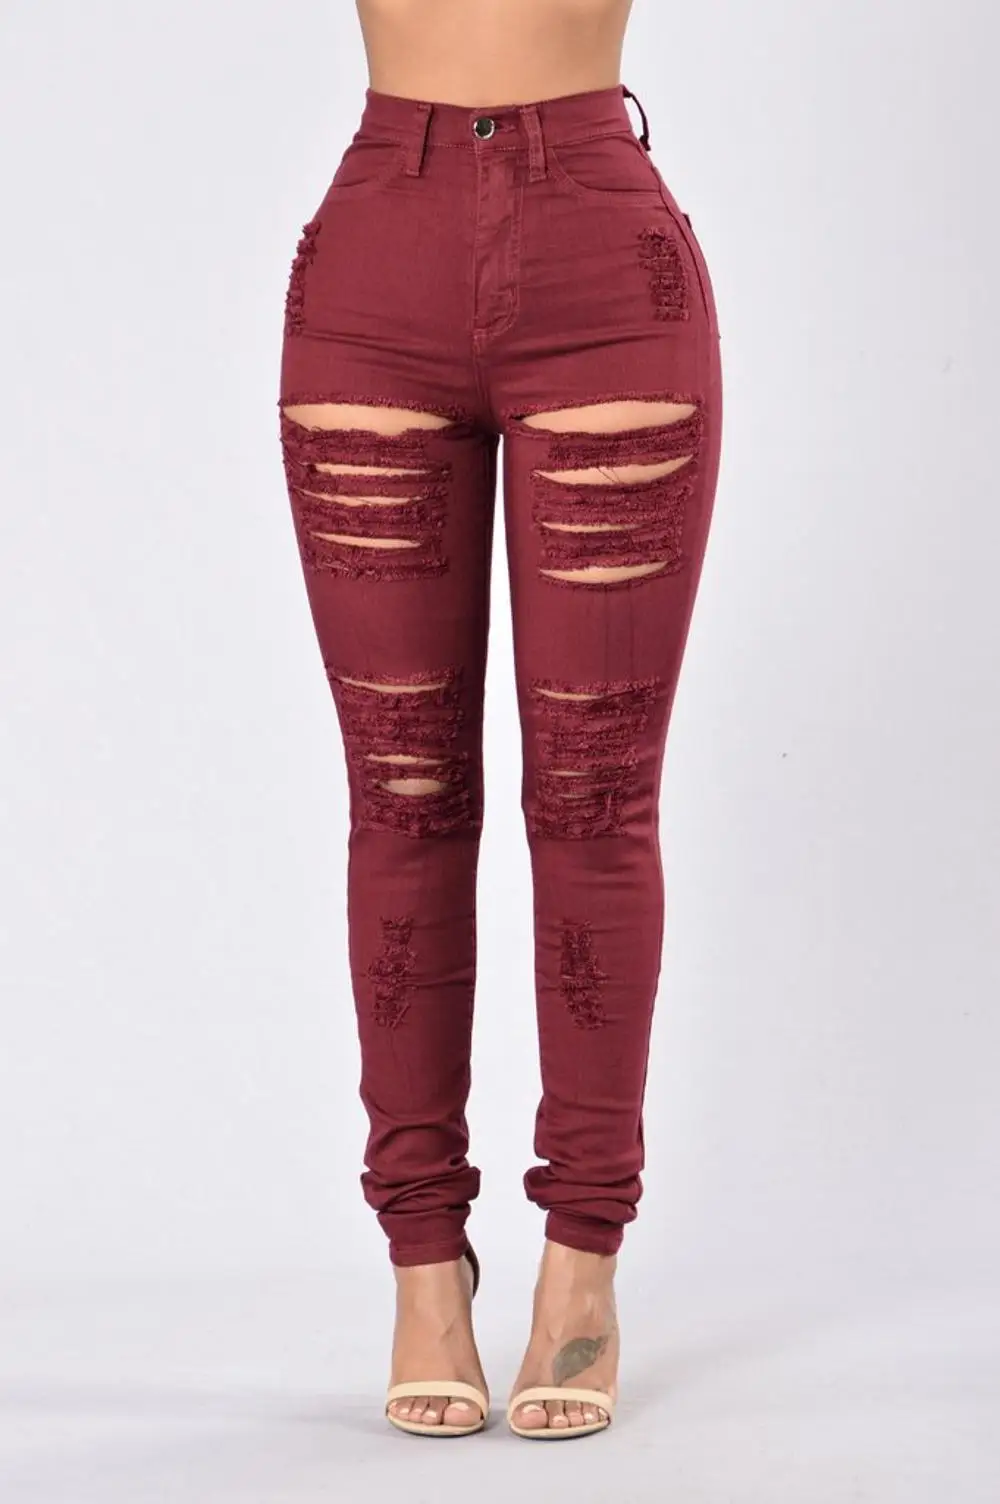 2018 Plus Size Hole Women Wine Red Jeans Ripped Jeans Pencil Chic Girl ...